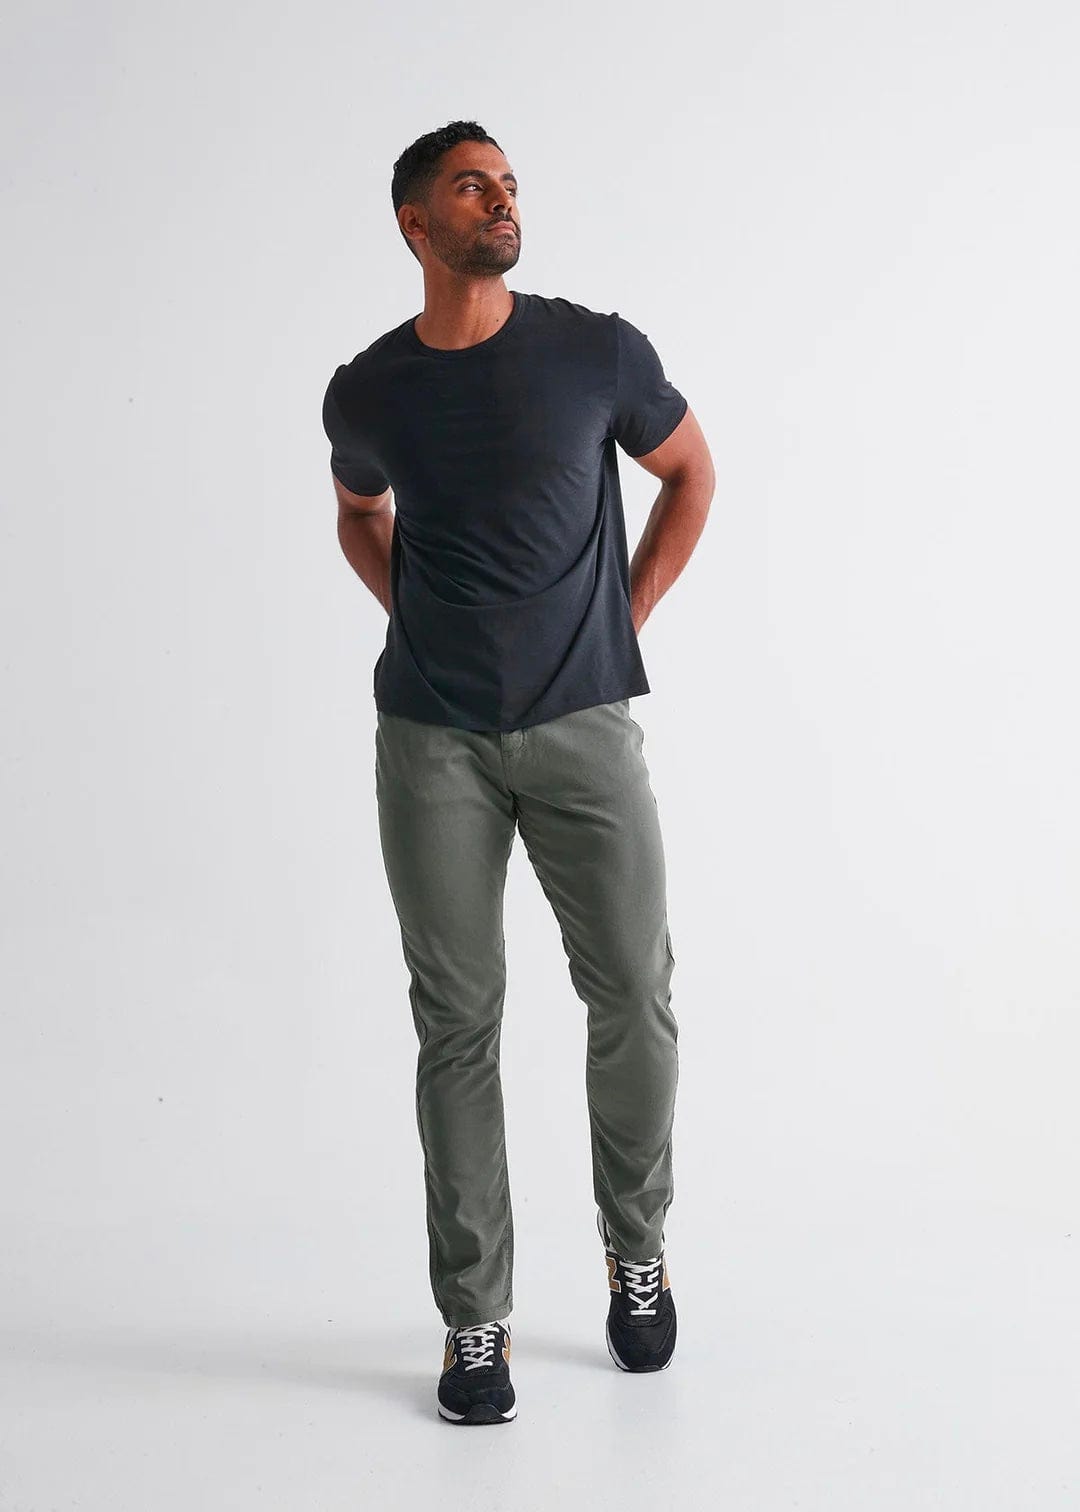 DU/ER PANT NO SWEAT RELAXED